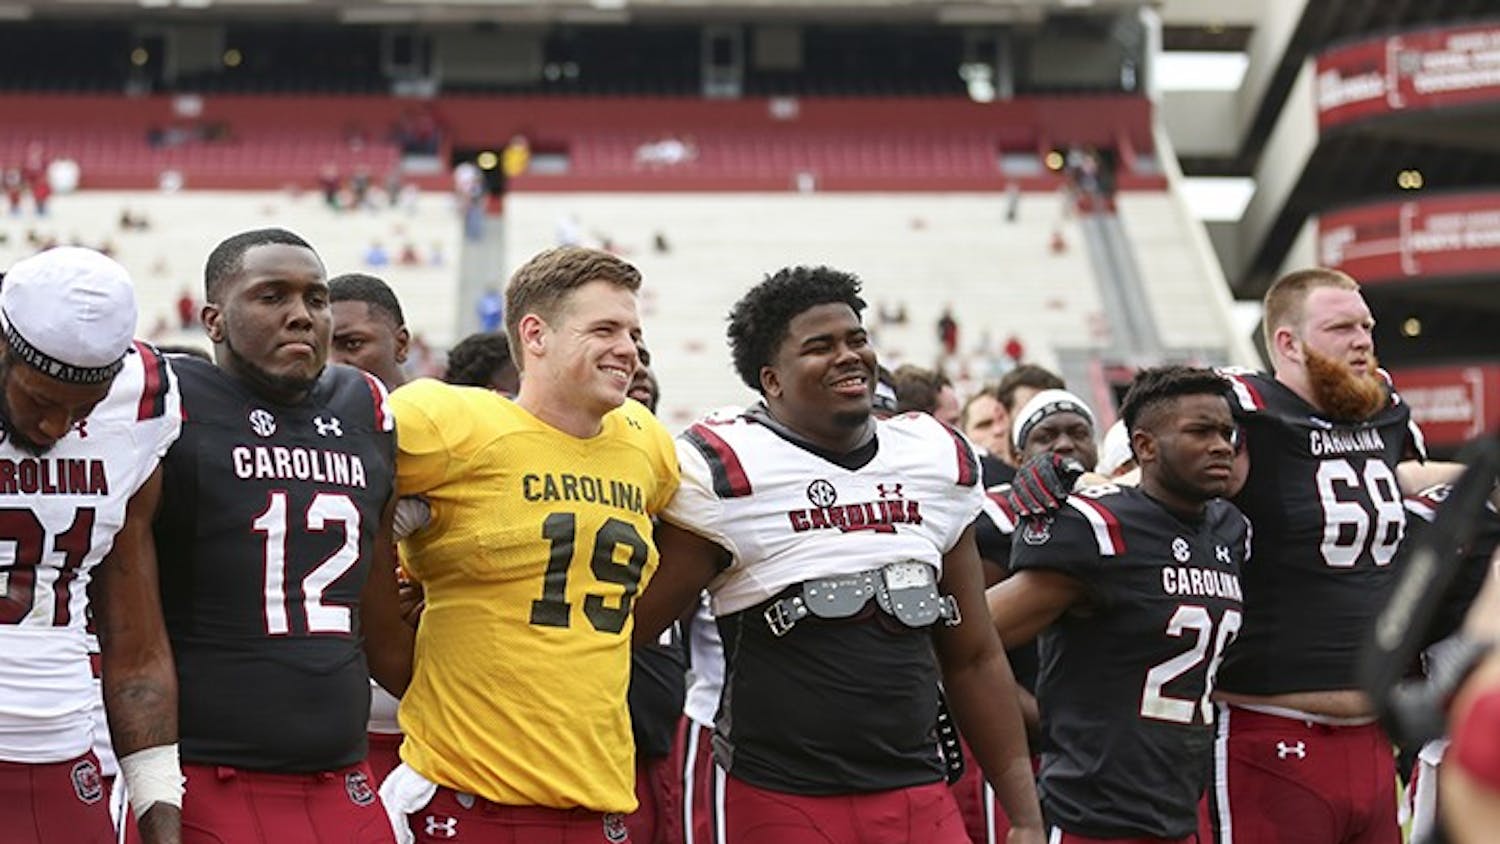 Seniors Jake Bentley and Javon Kinlaw smile during the alma mater following the spring game at Williams-Brice Stadium on Saturday.&nbsp;